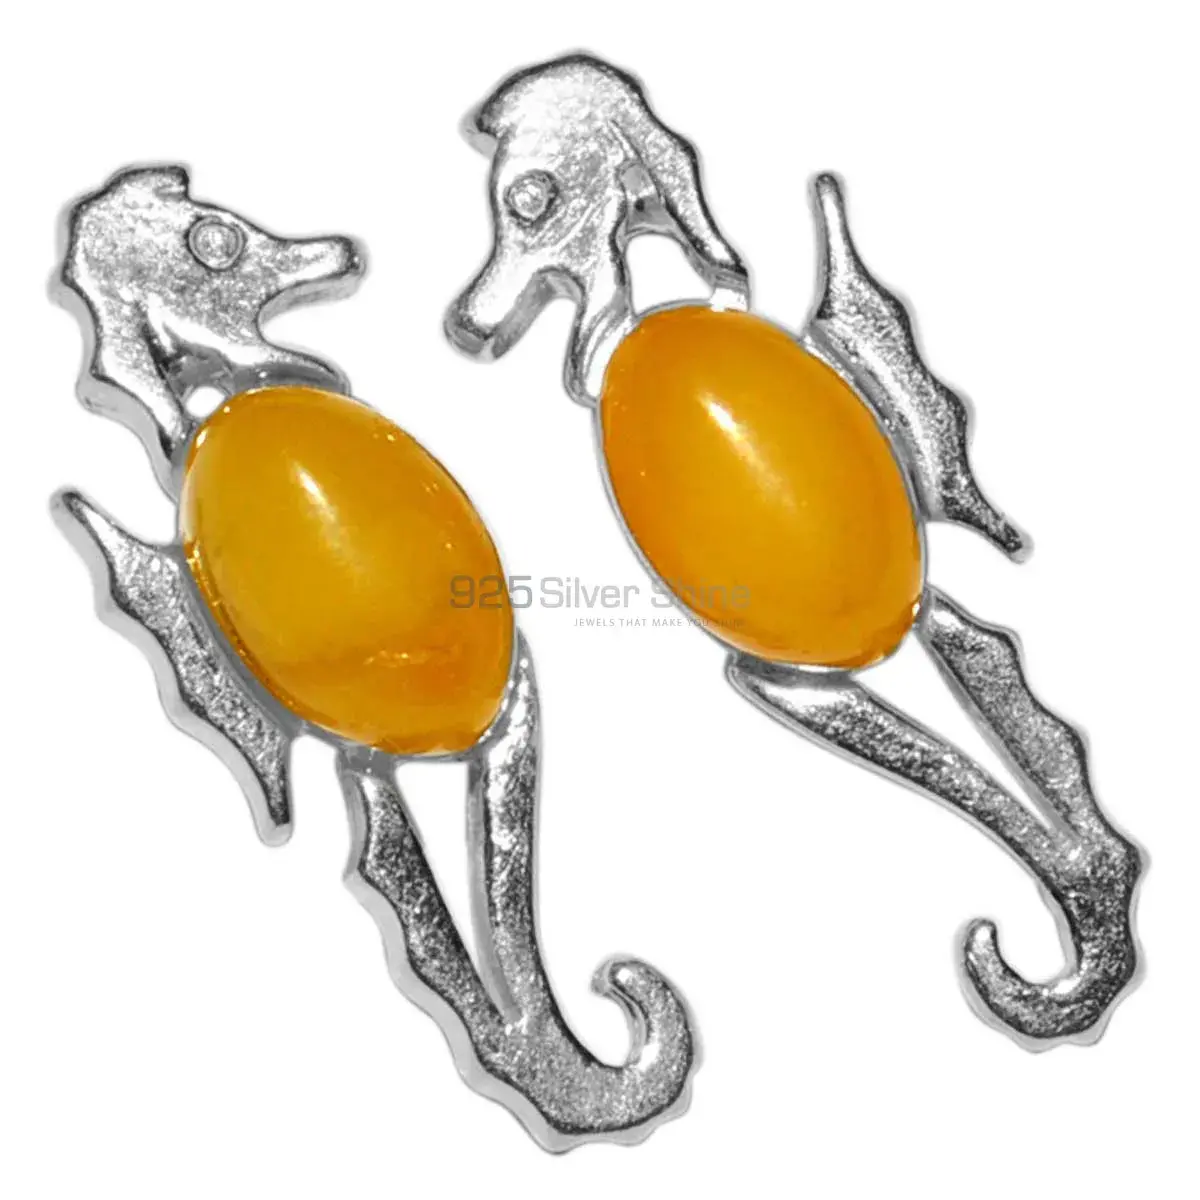 High Quality 925 Sterling Silver Earrings In Amber Gemstone Jewelry 925SE2931